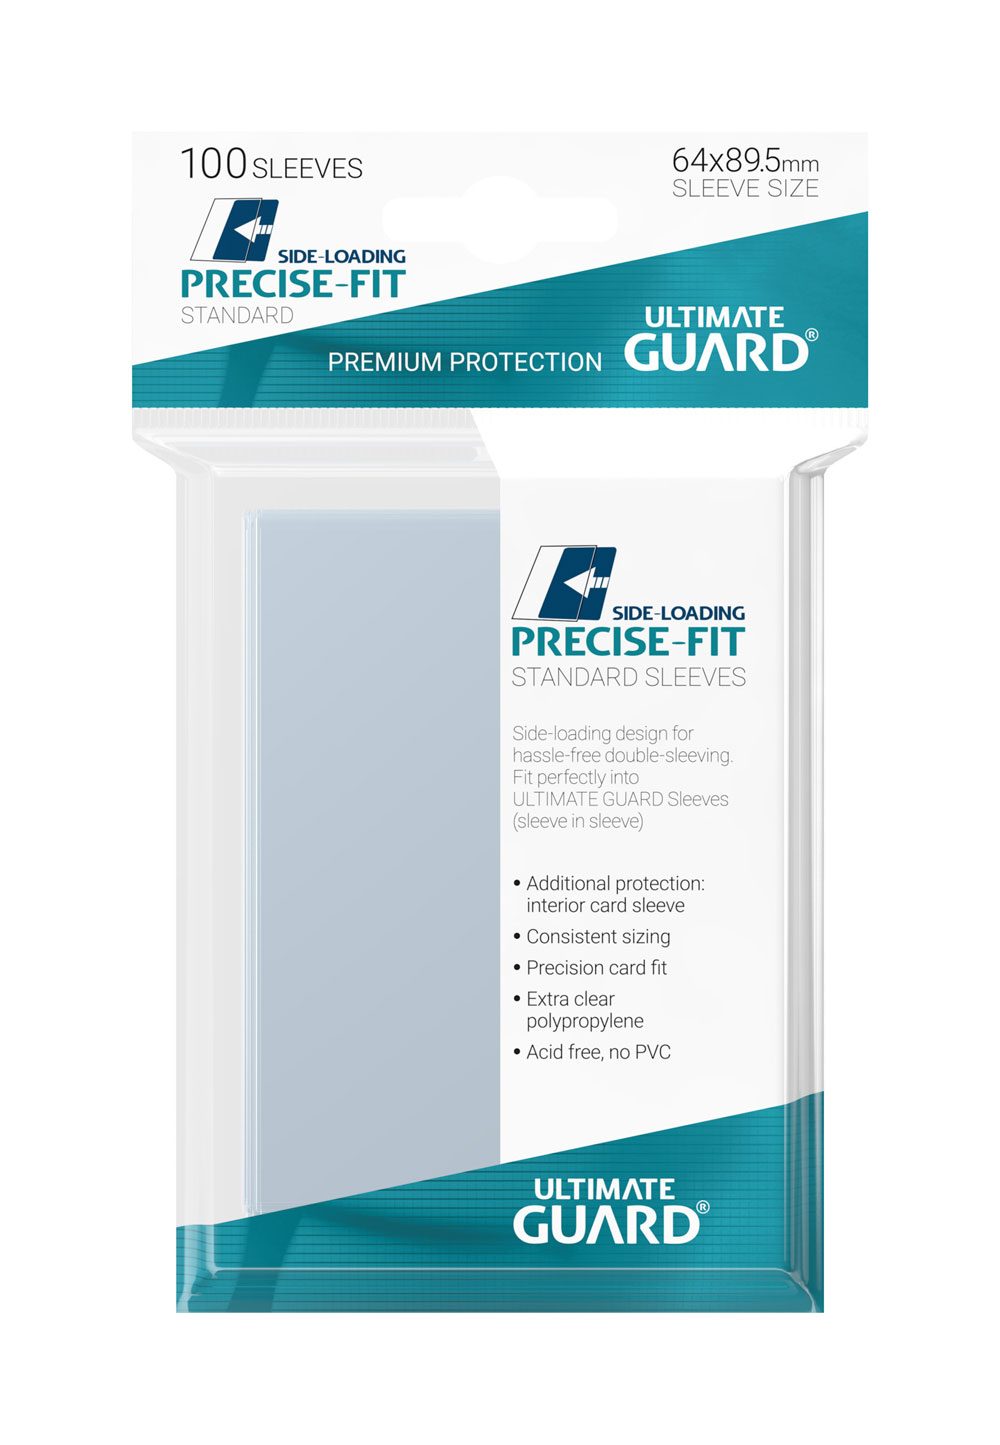 Vorderseite: UG PRECISE-FIT SLEEVES SIDE-LOADING